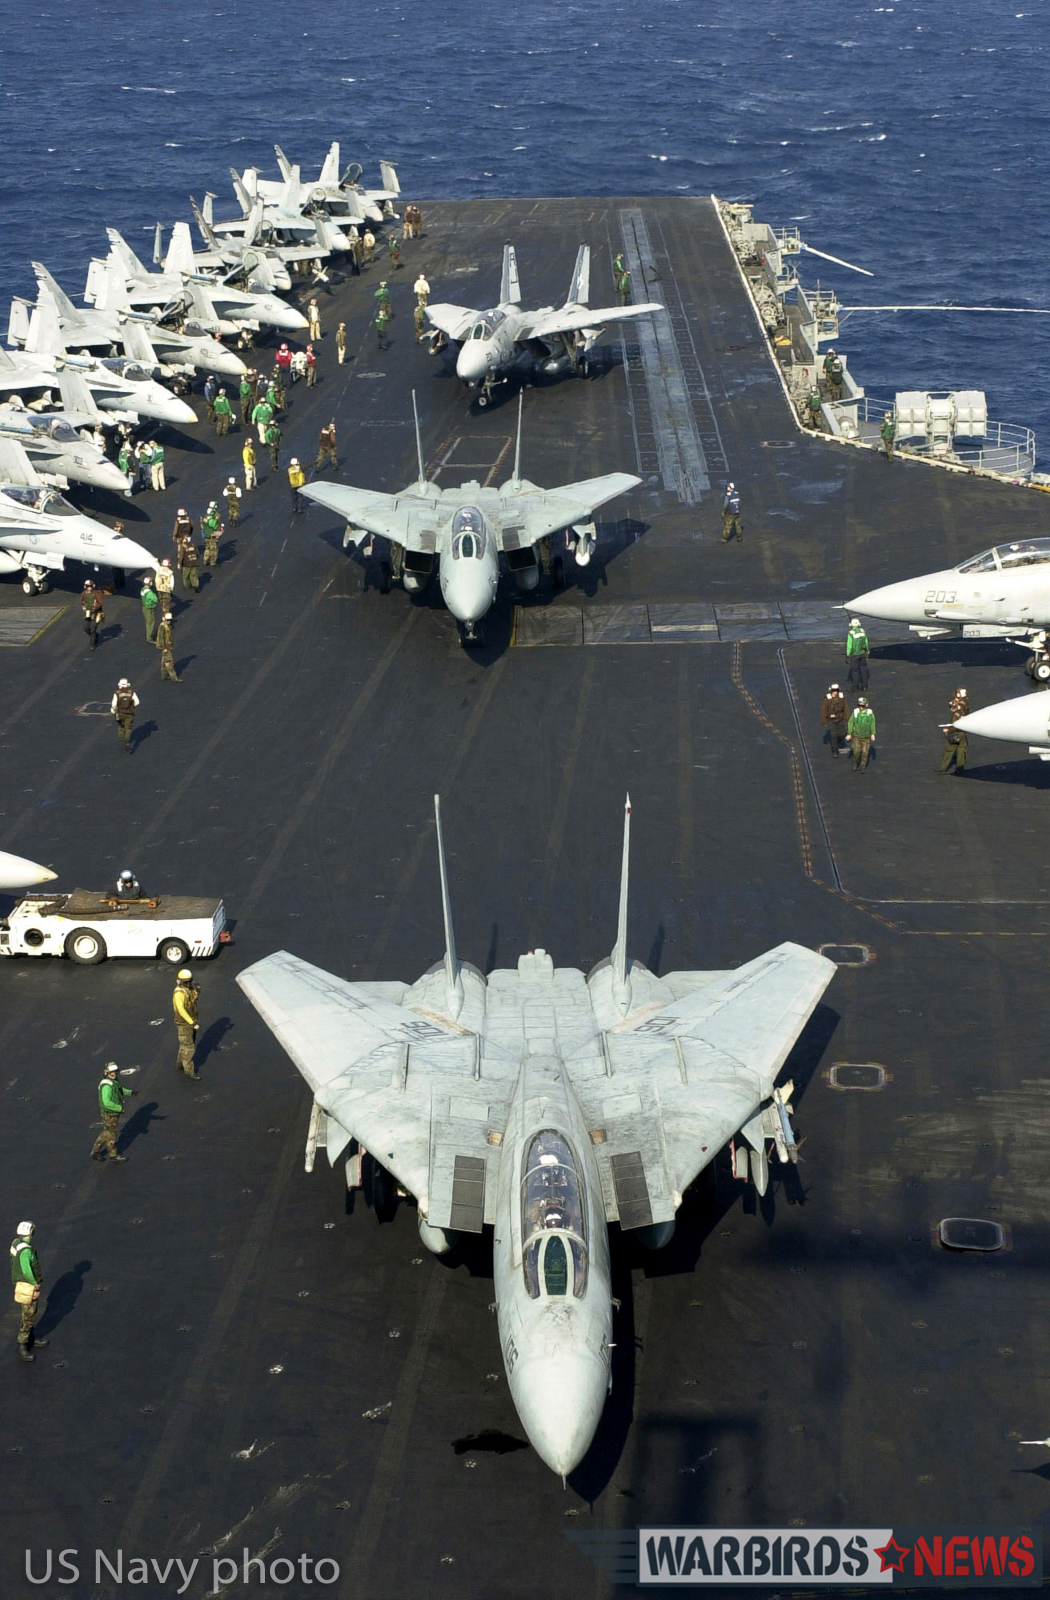 Aboard USS Enterprise (CVN 65) Nov 9, 2001-- F-14 Tomcats prepare to take off from the flight deck of USS Enterprise a final time. This was the last time the 34 year-old aircraft will be deploying on the carrier. USS Enterprise (CVN 65) is returning to her homeport in Norfolk, Virginia after completing a six-month deployment. U.S. Navy Photo by Photographer's Mate 1st Class, Martin Maddock. (RLEASED)